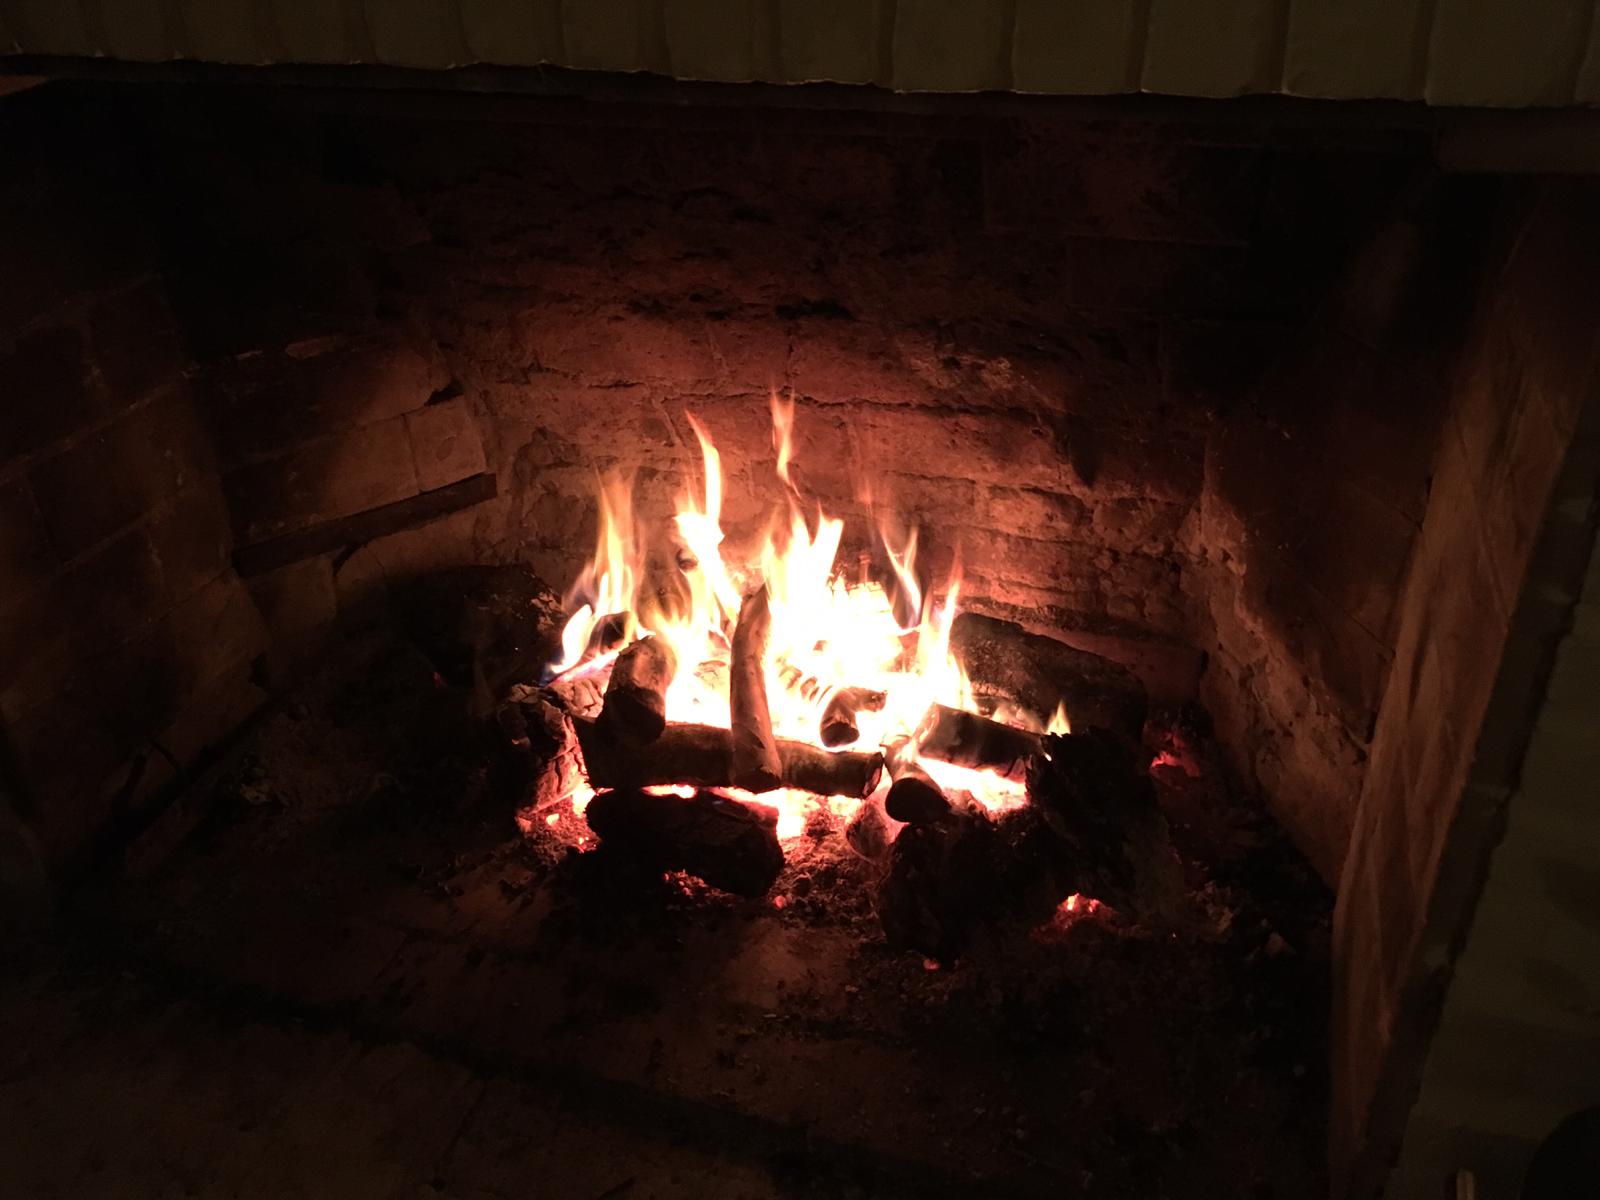 a lit fireplace, because this shall end in flames